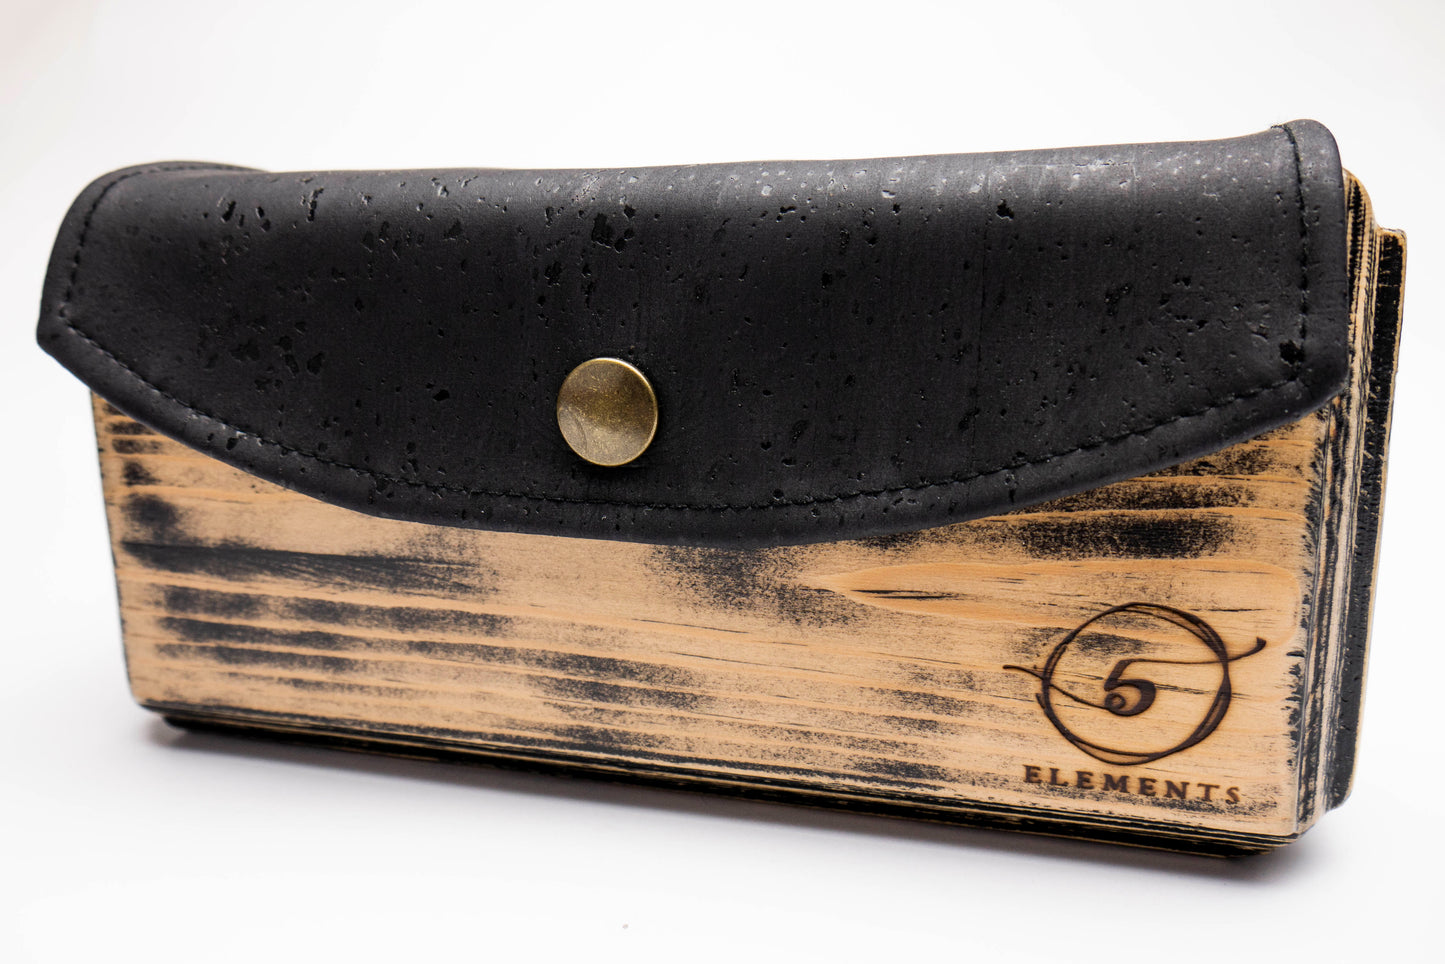 Wooden handmade clutch bag with black cork leather.